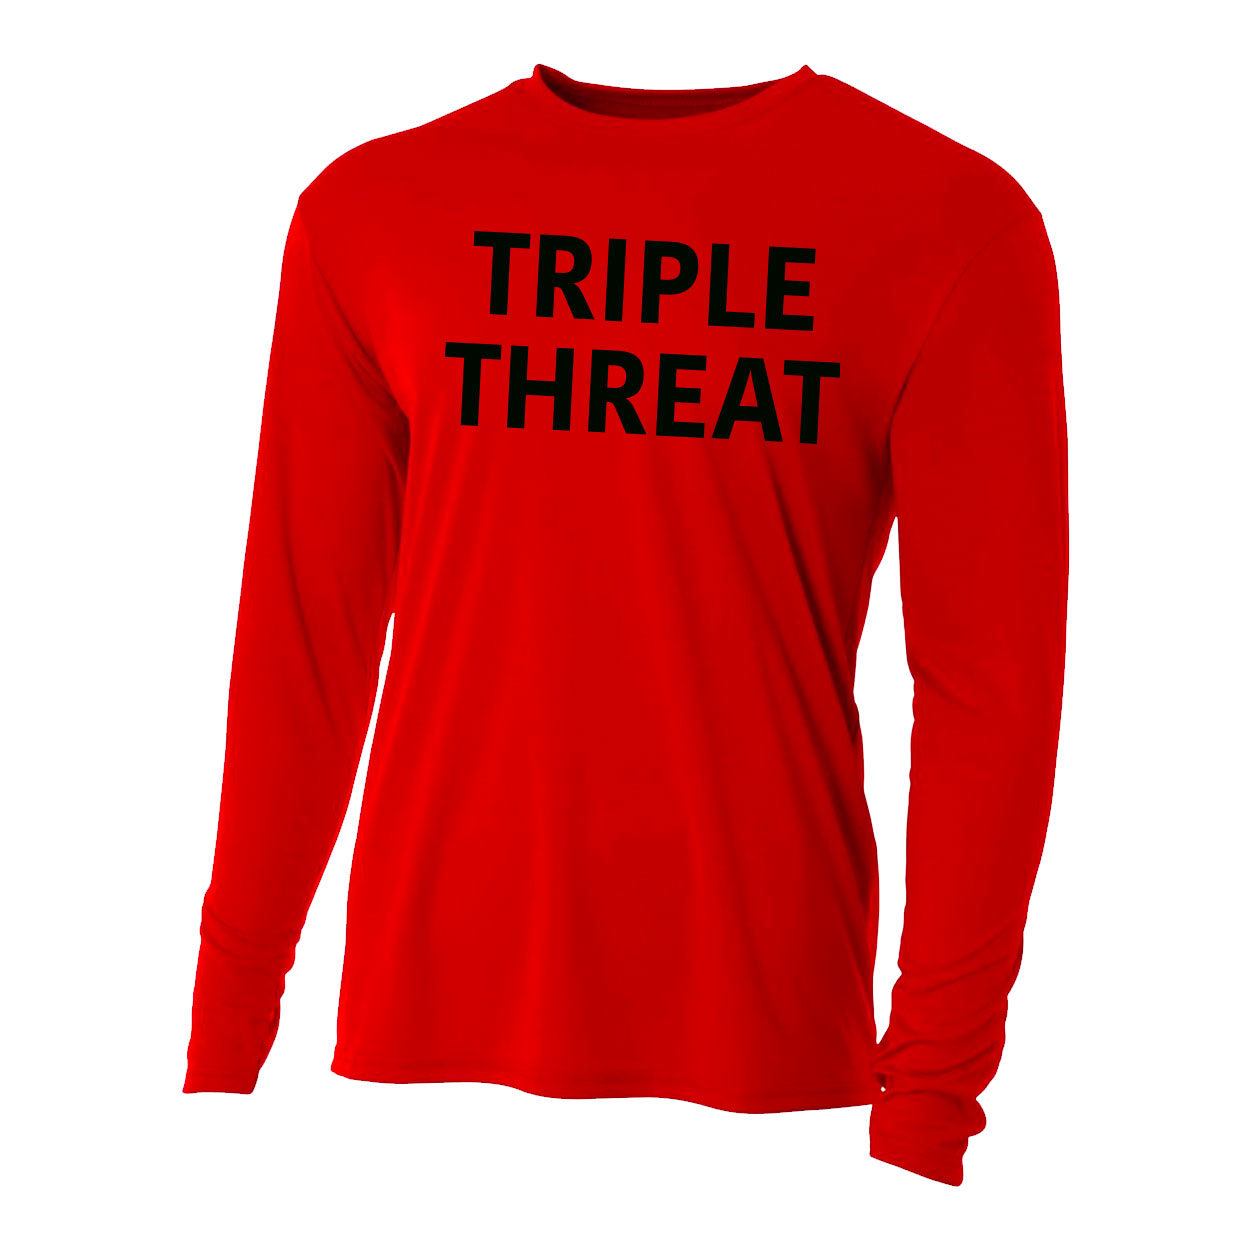 TRIPLE THREAT YOUTH, WOMEN'S & MEN'S PERFORMANCE LONG SLEEVE - RED